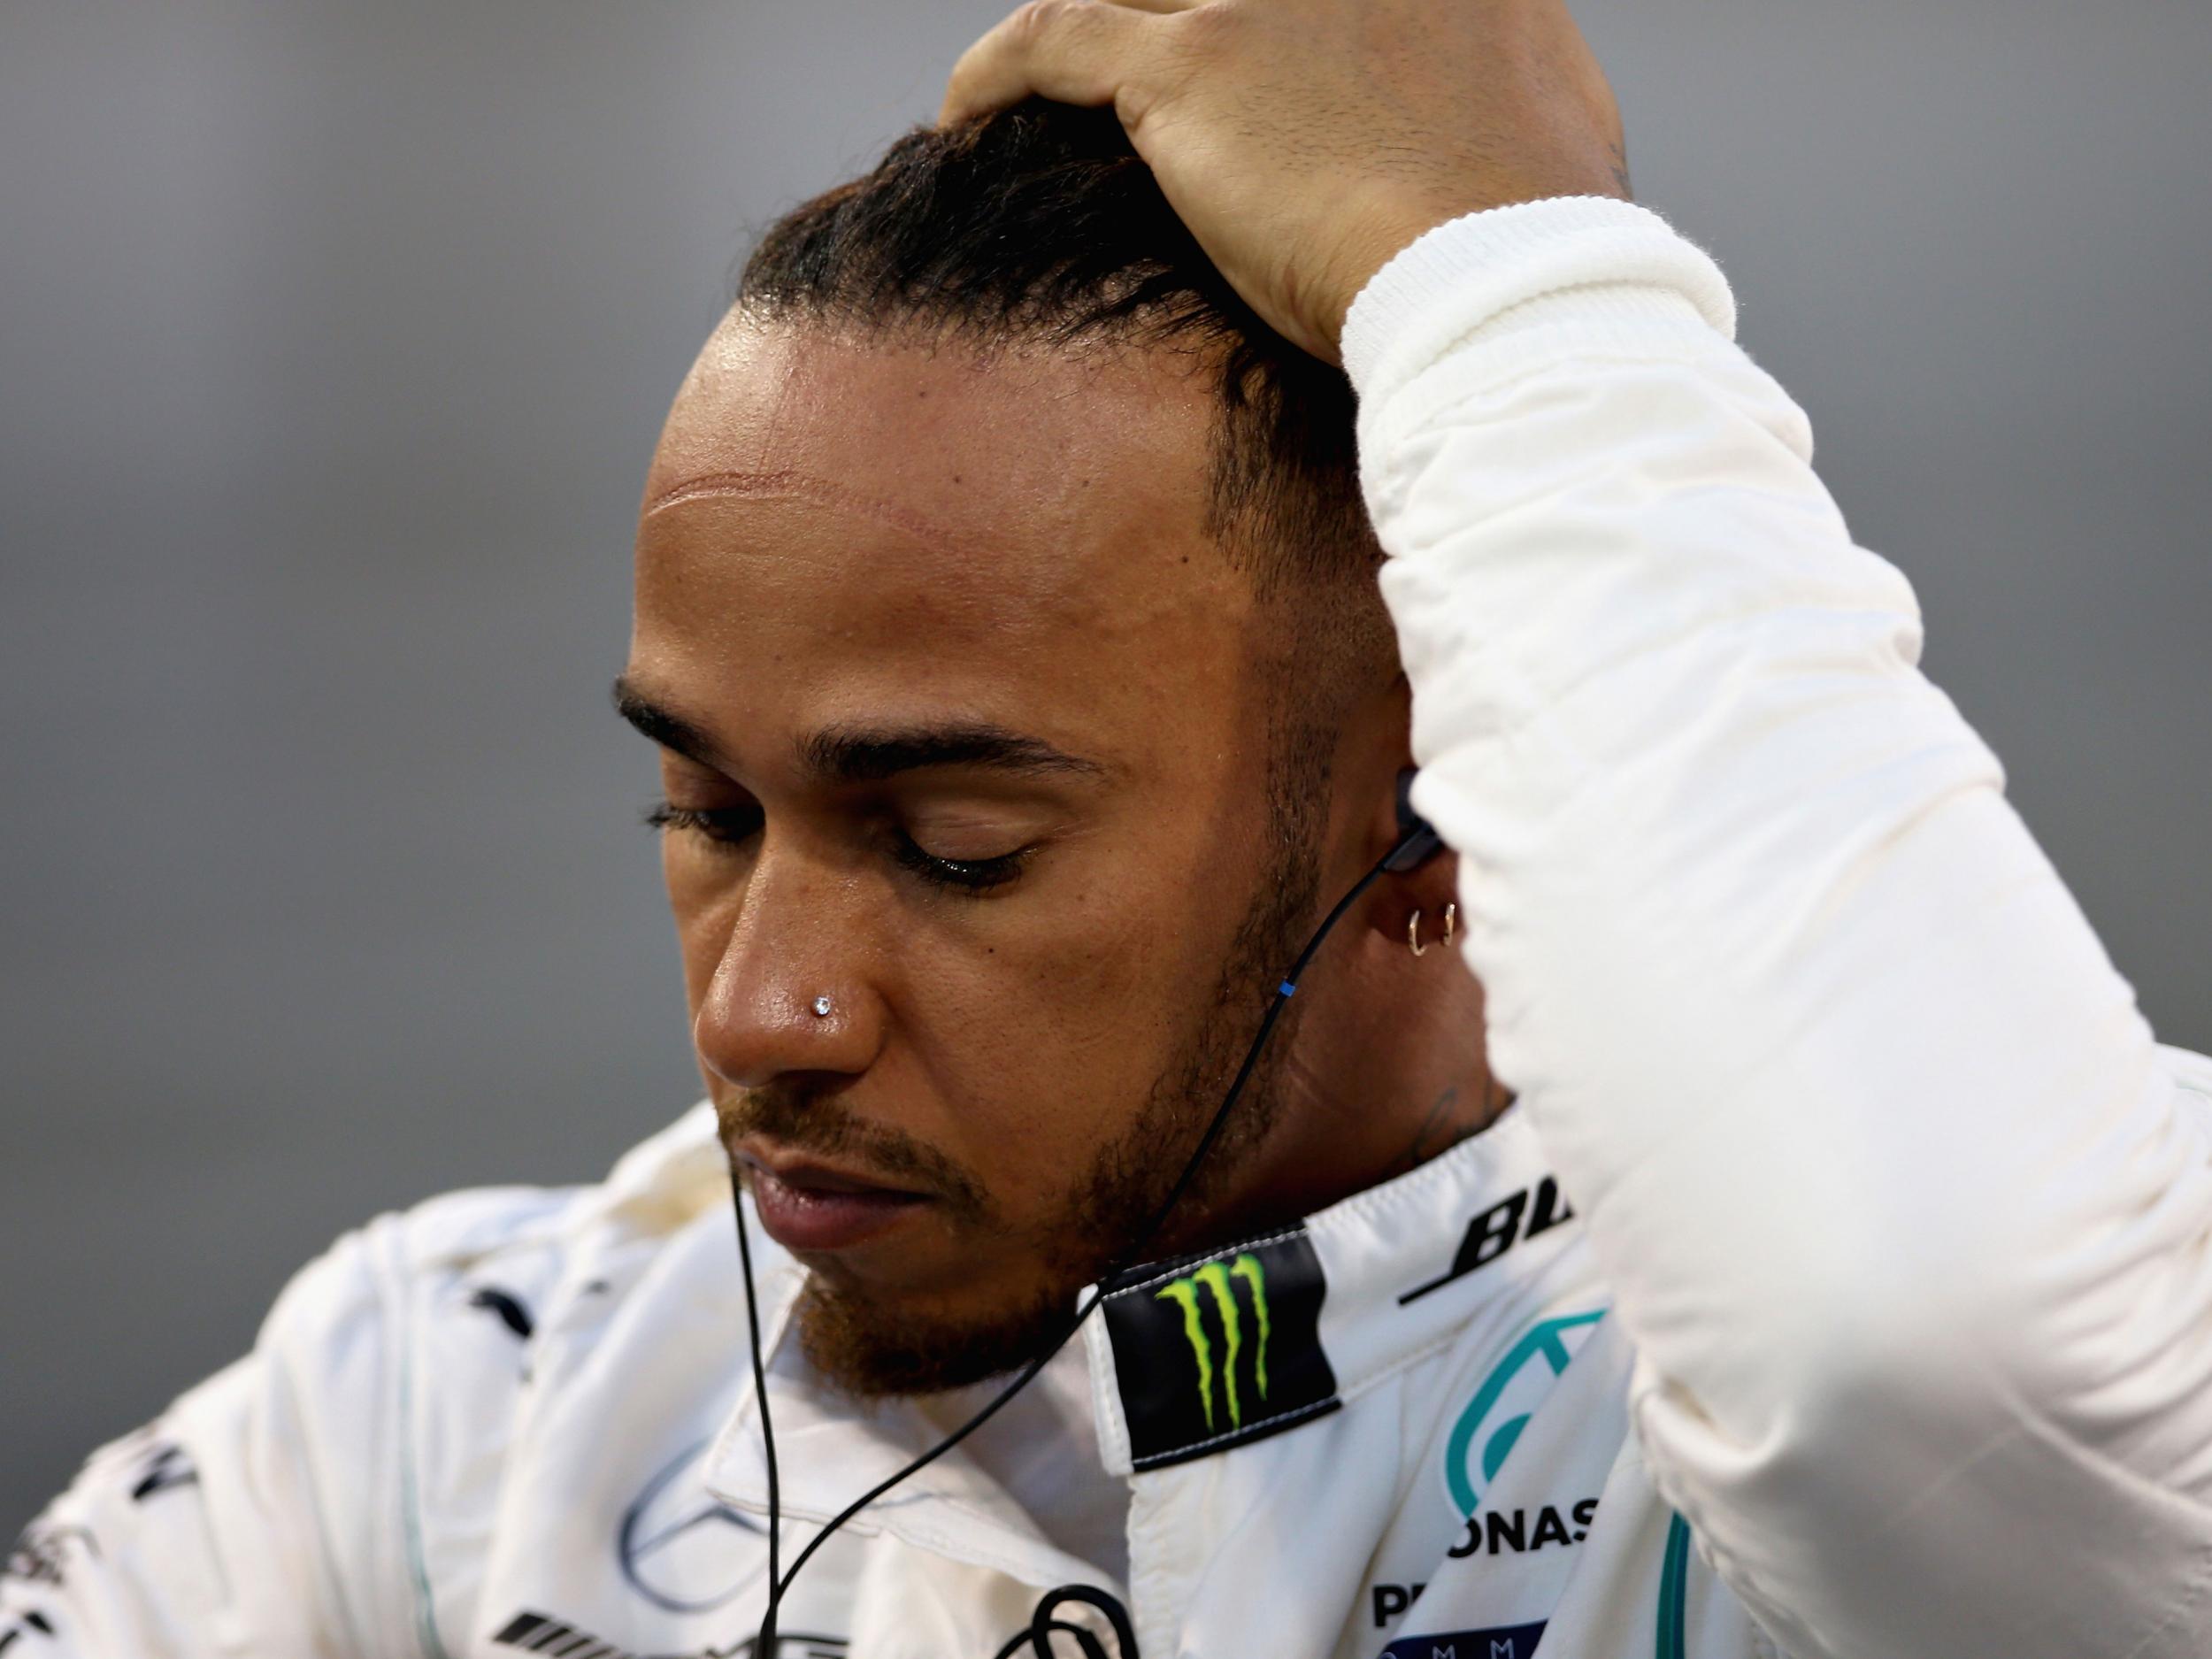 Lewis Hamilton is determined to bounce back in China